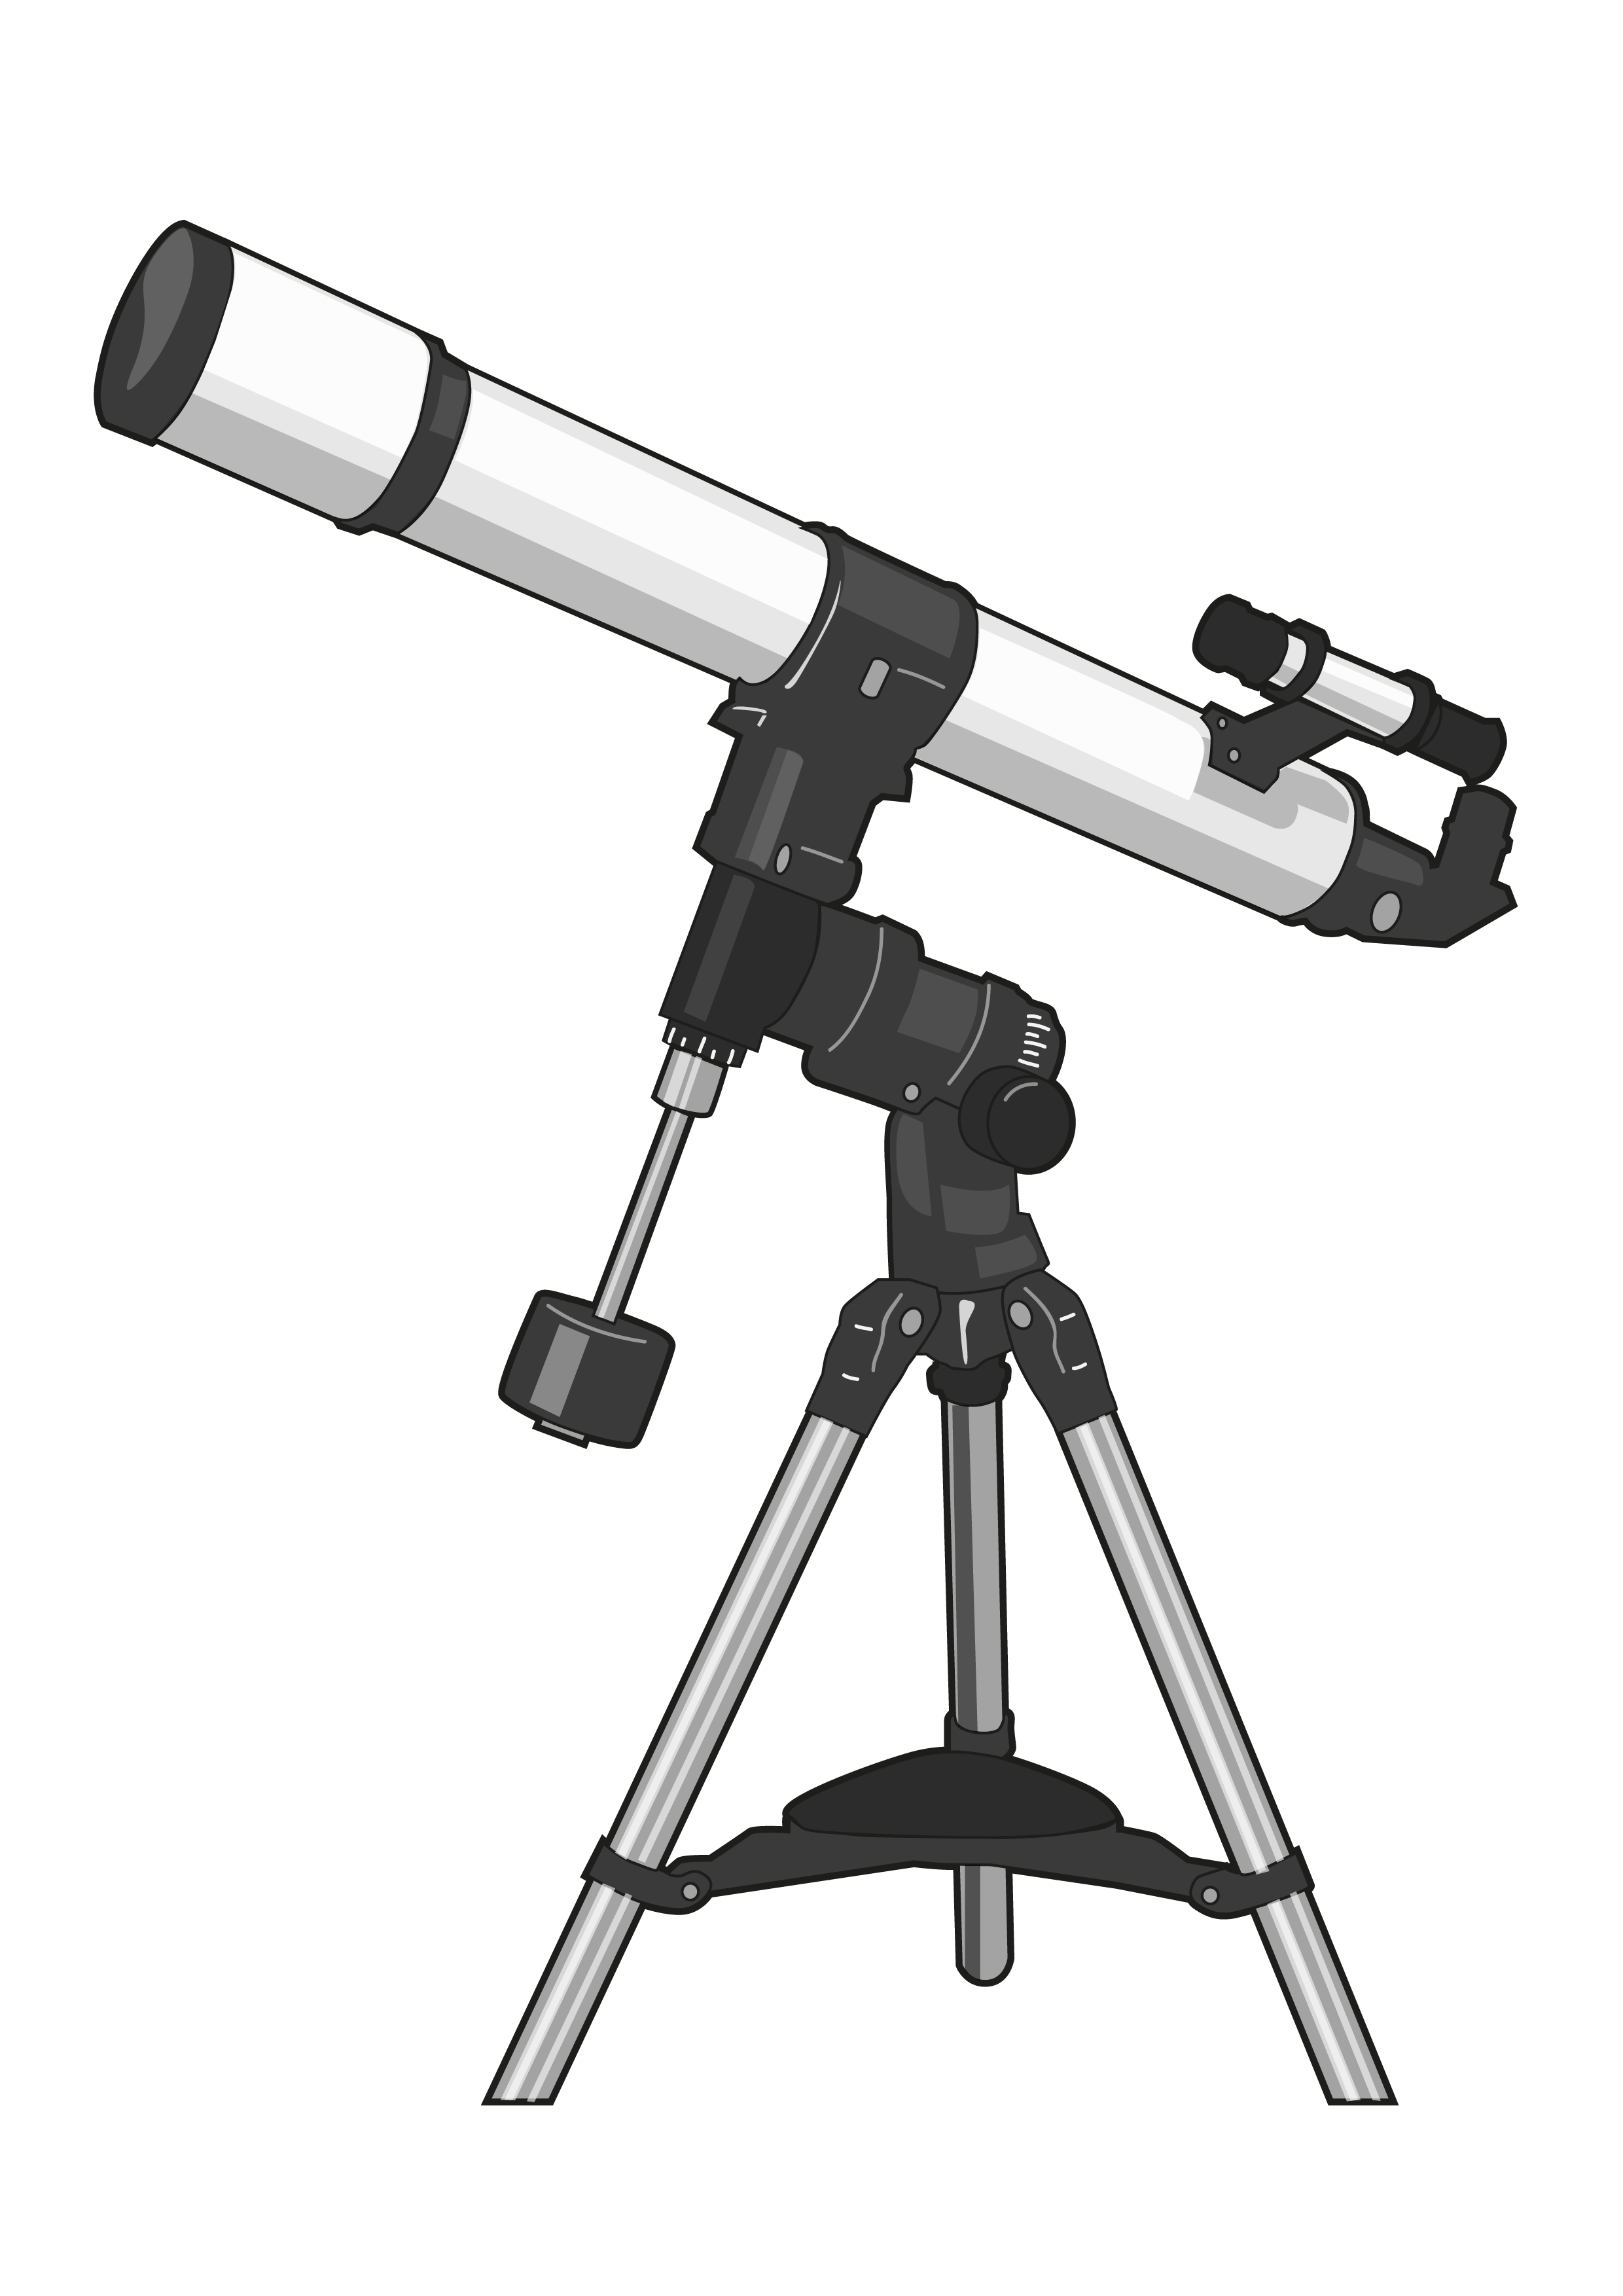 Telescope Png Transparent Image Download Size 2480x3508px